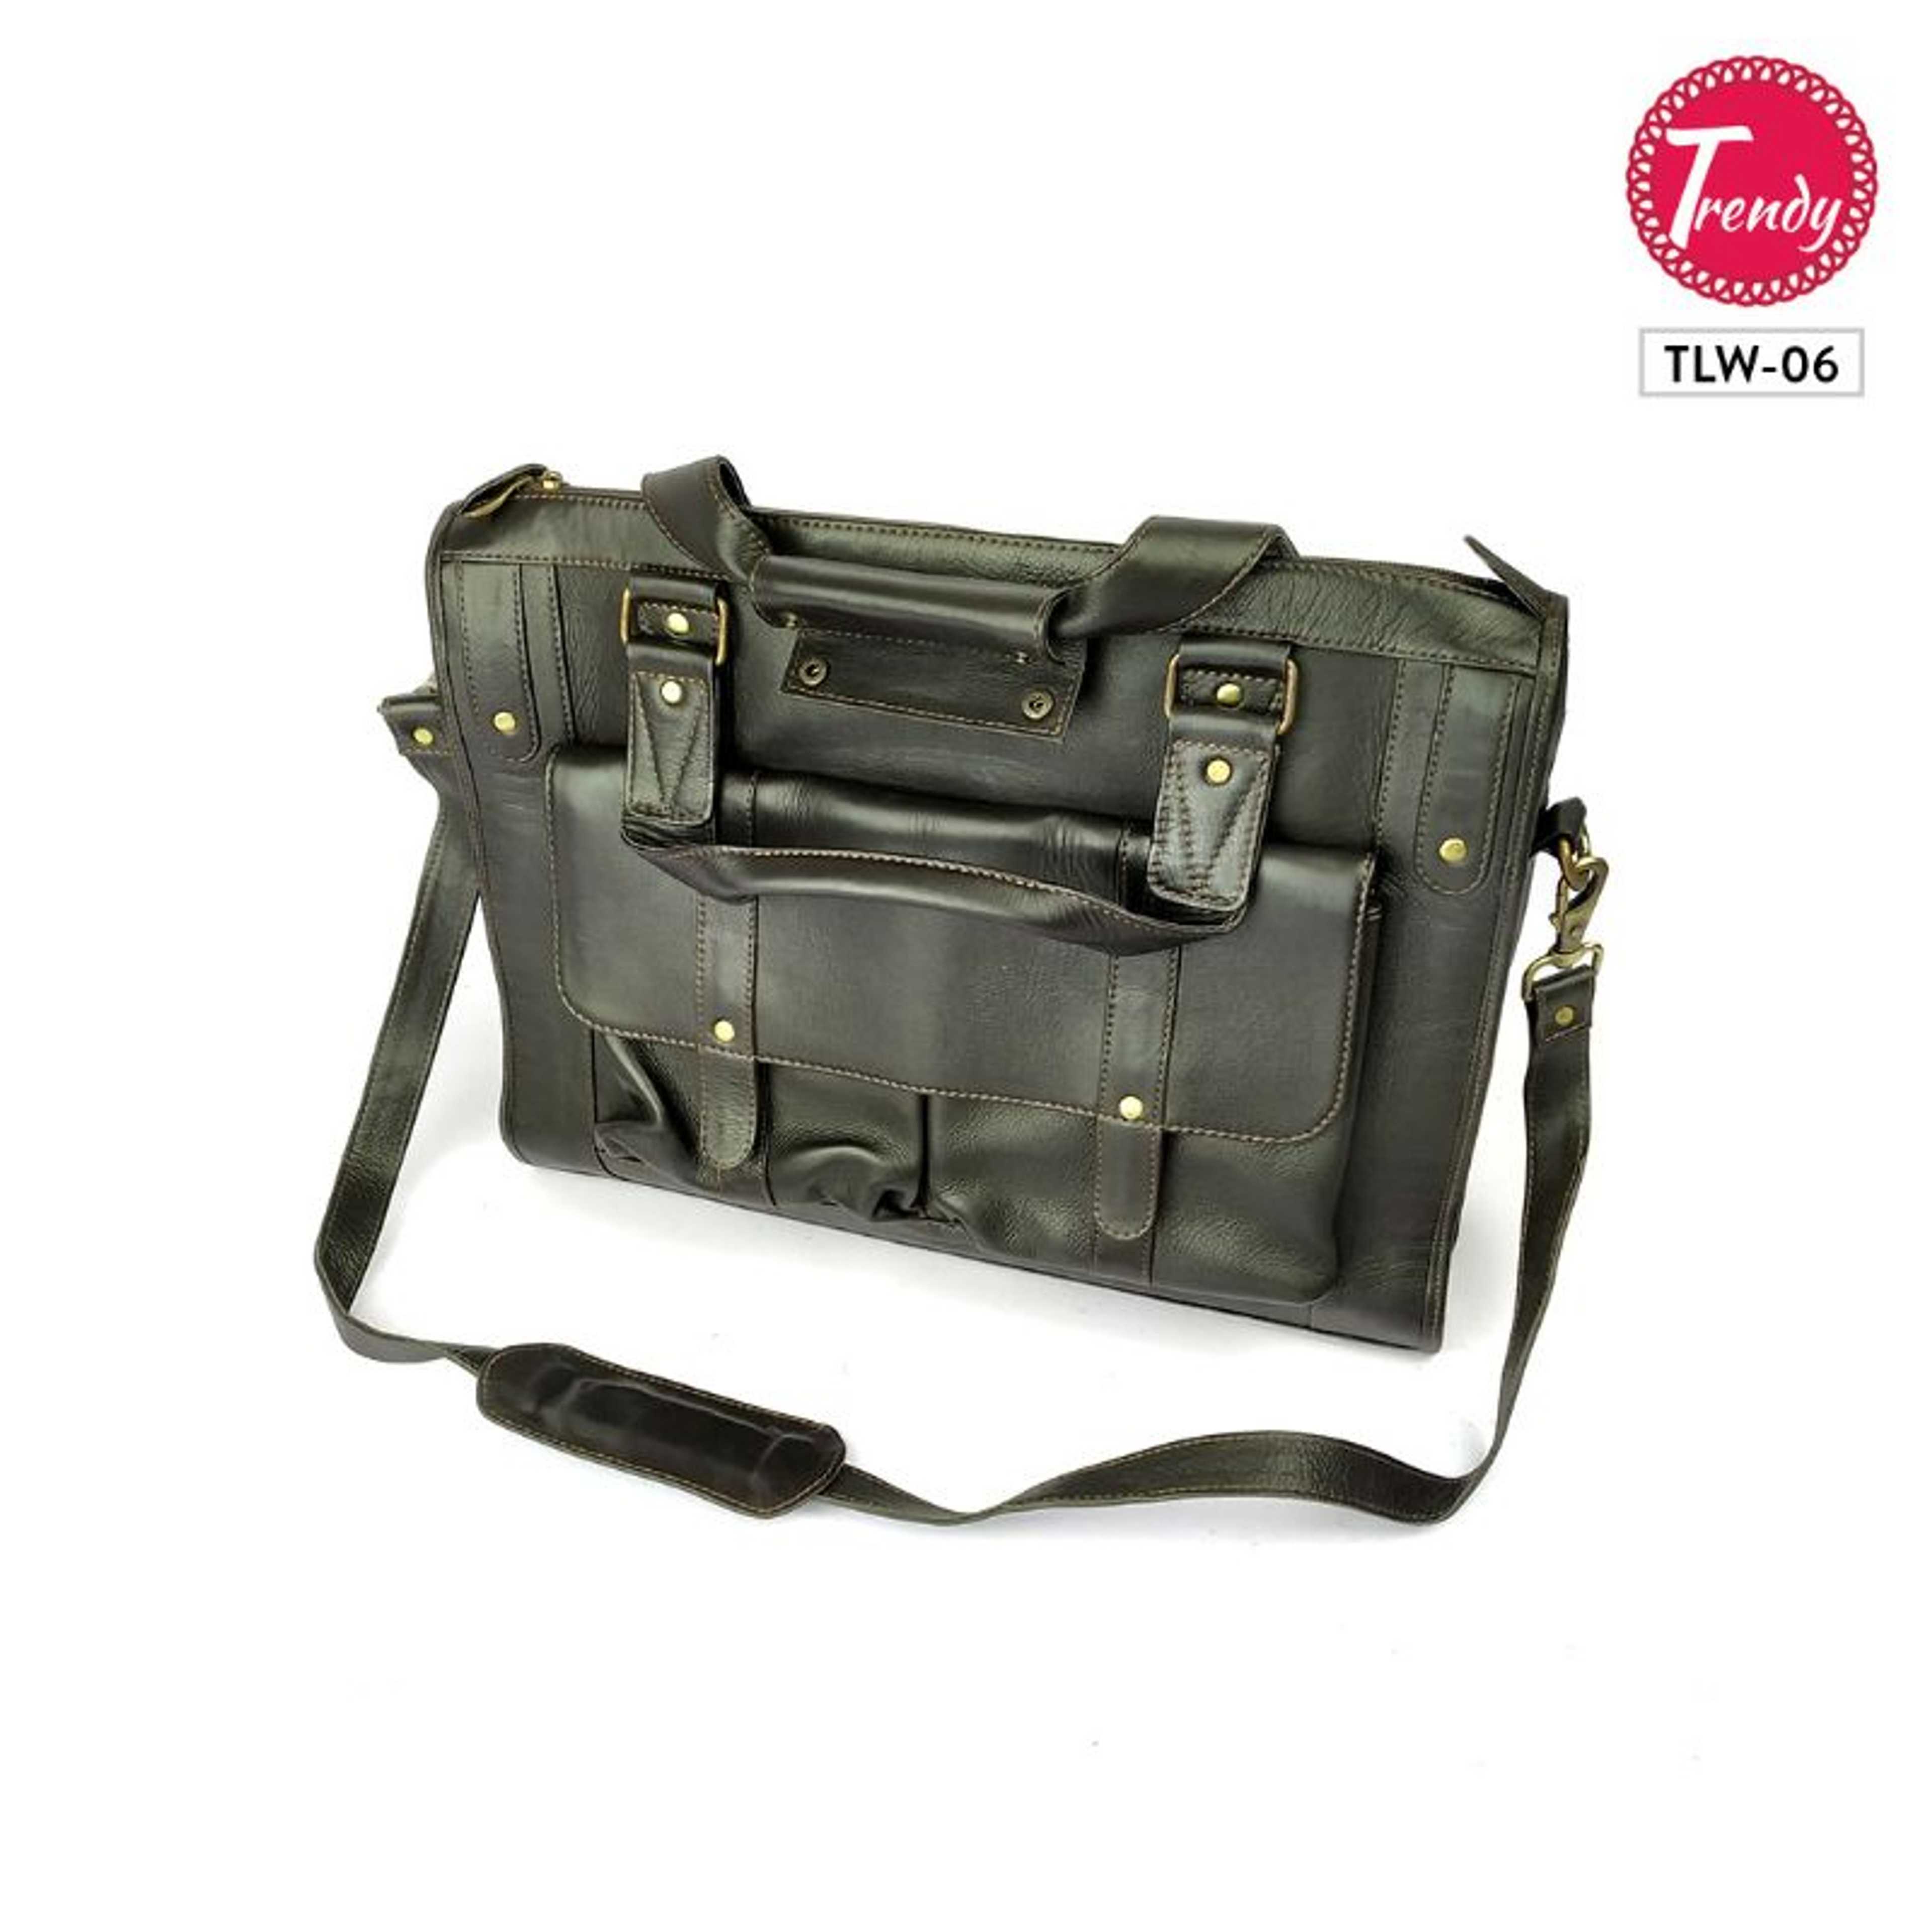 Most Executive Original Leather Office Bag in Black